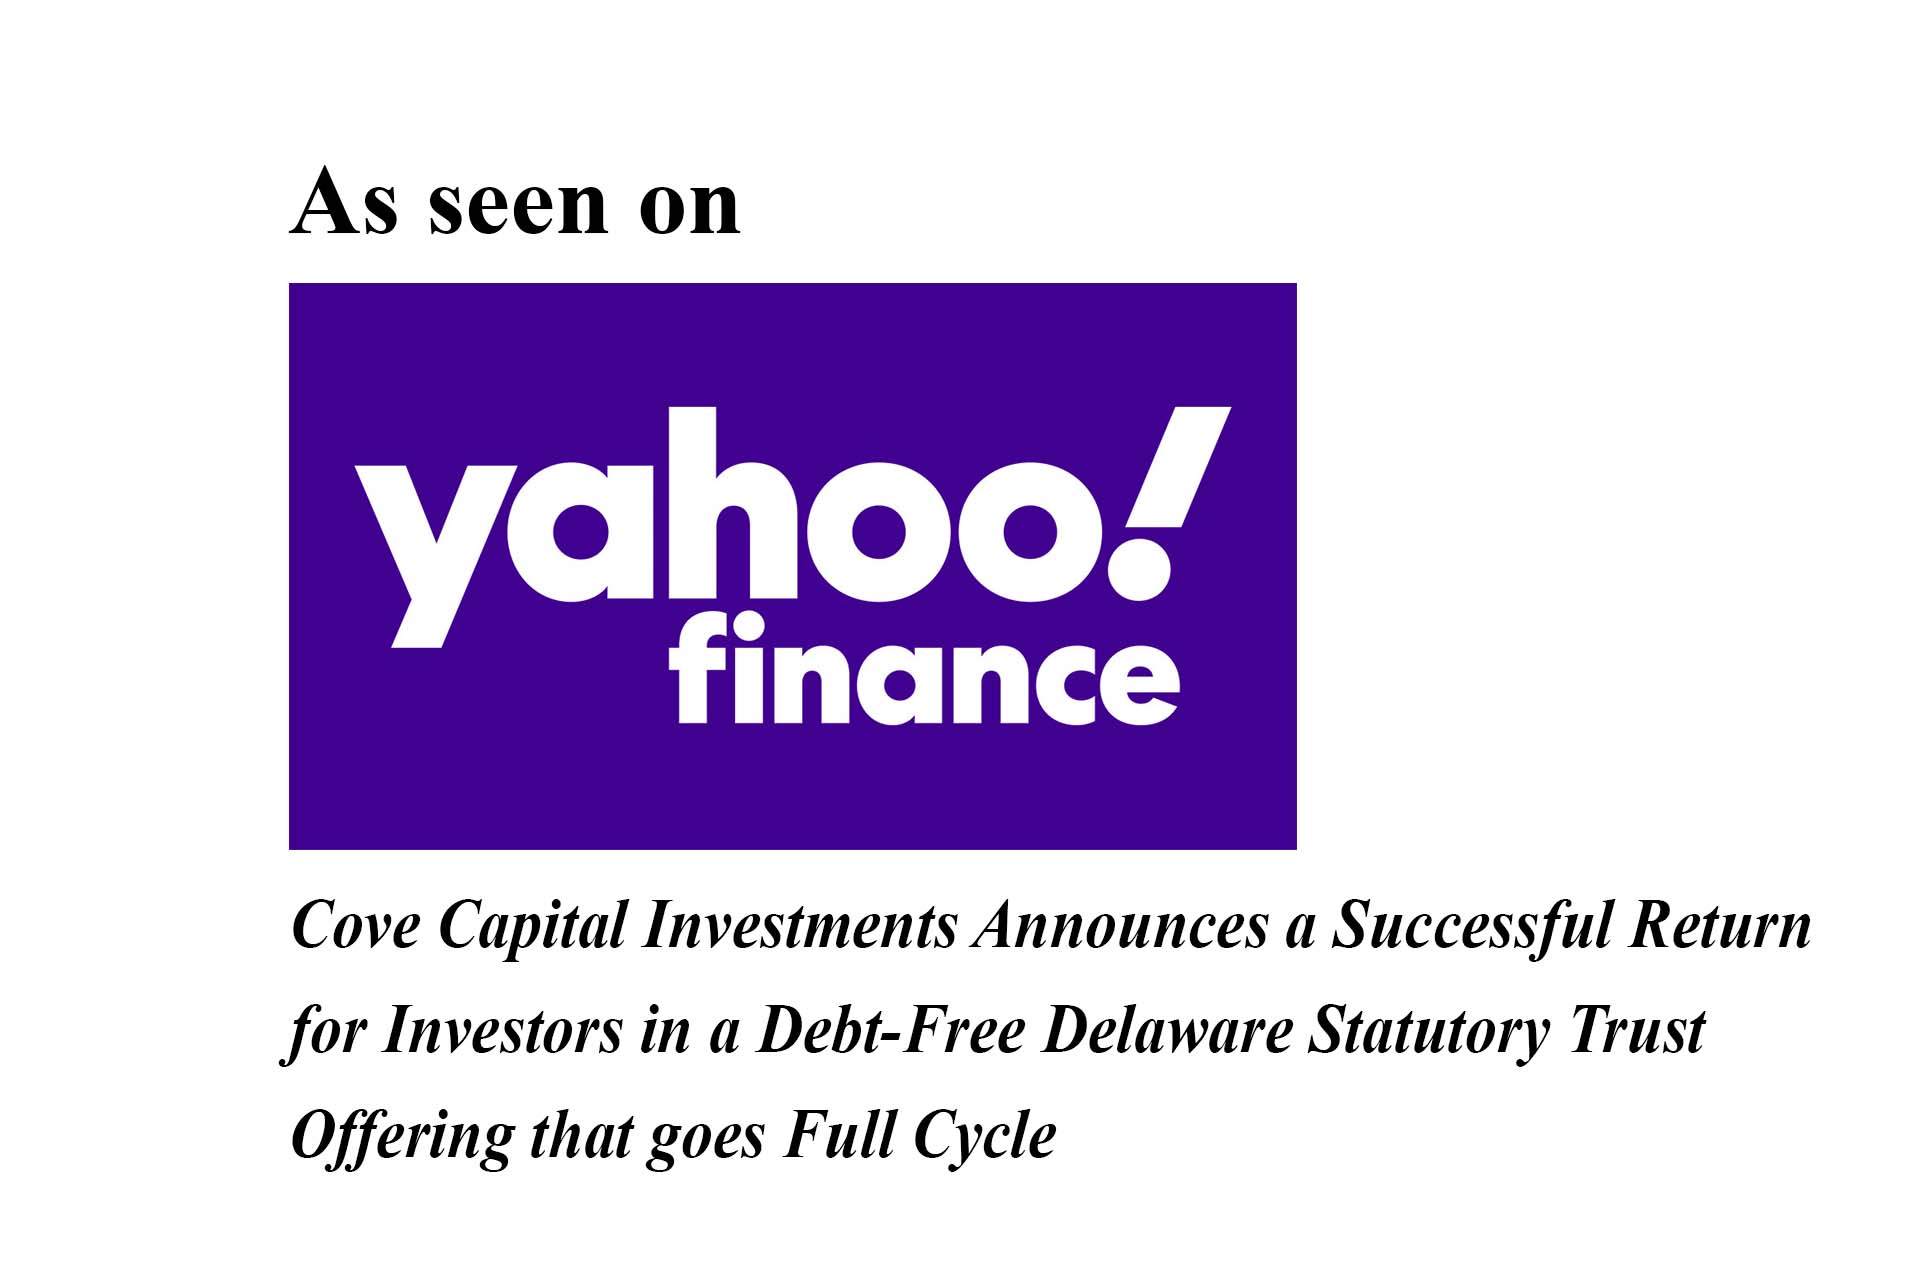 Featured image for “Cove Capital Investments Announces a Successful Return for Investors in a Debt-Free Delaware Statutory Trust Offering That Has Goes Full Cycle”